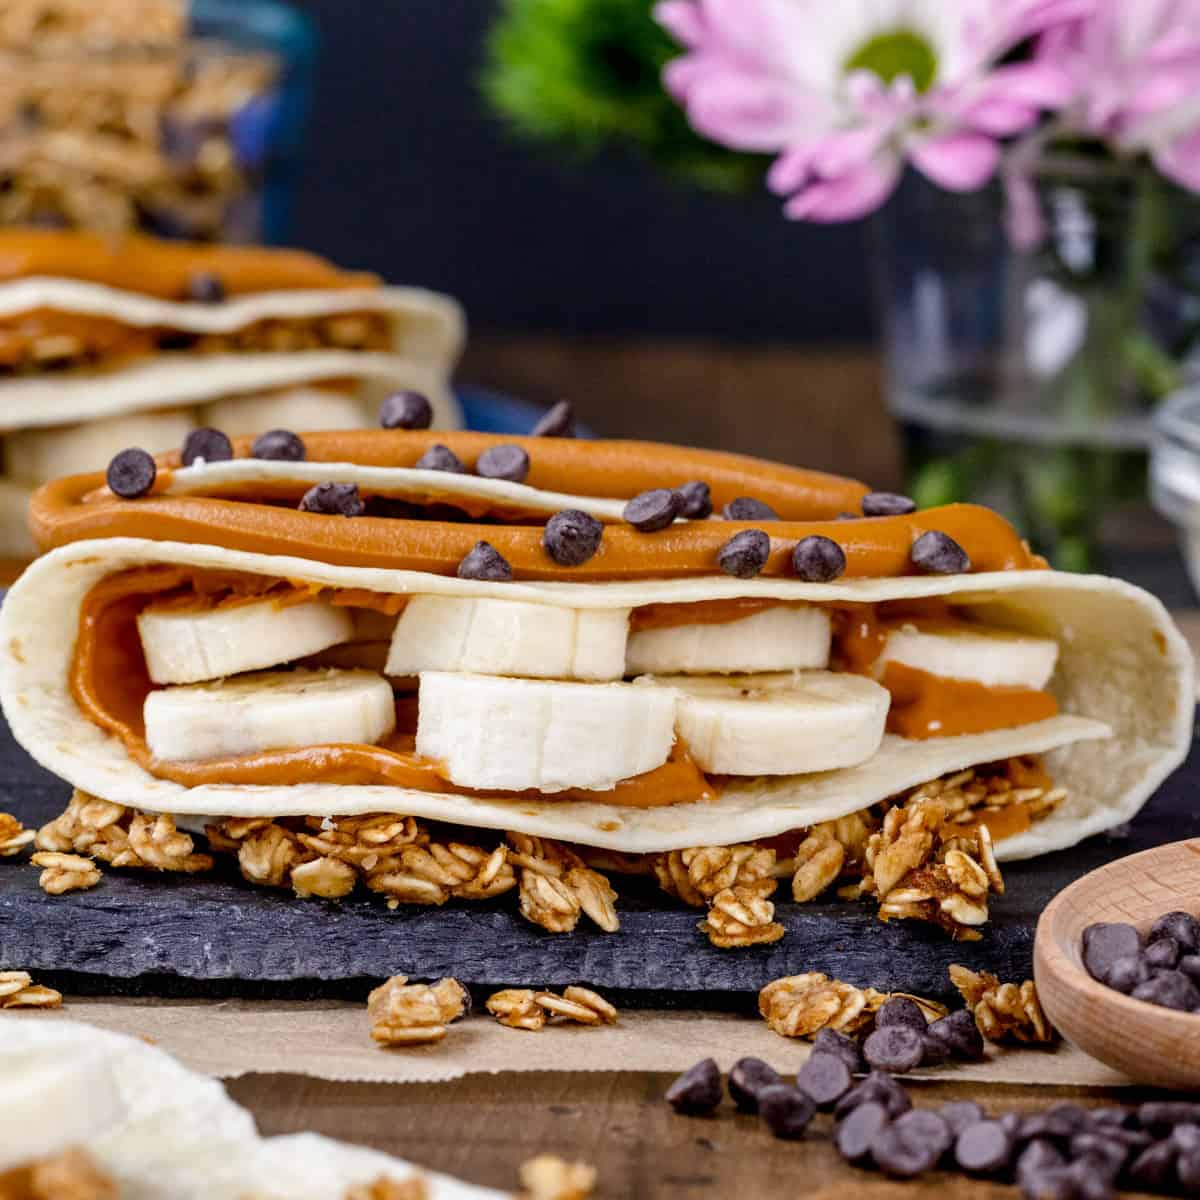 Closeup of a finished sunbutter and banana wrap on a kitchen table filled with ingredients like banana slices, mini chocolate chips, and granola. Fresh flowers and more wraps are blurred in the background.